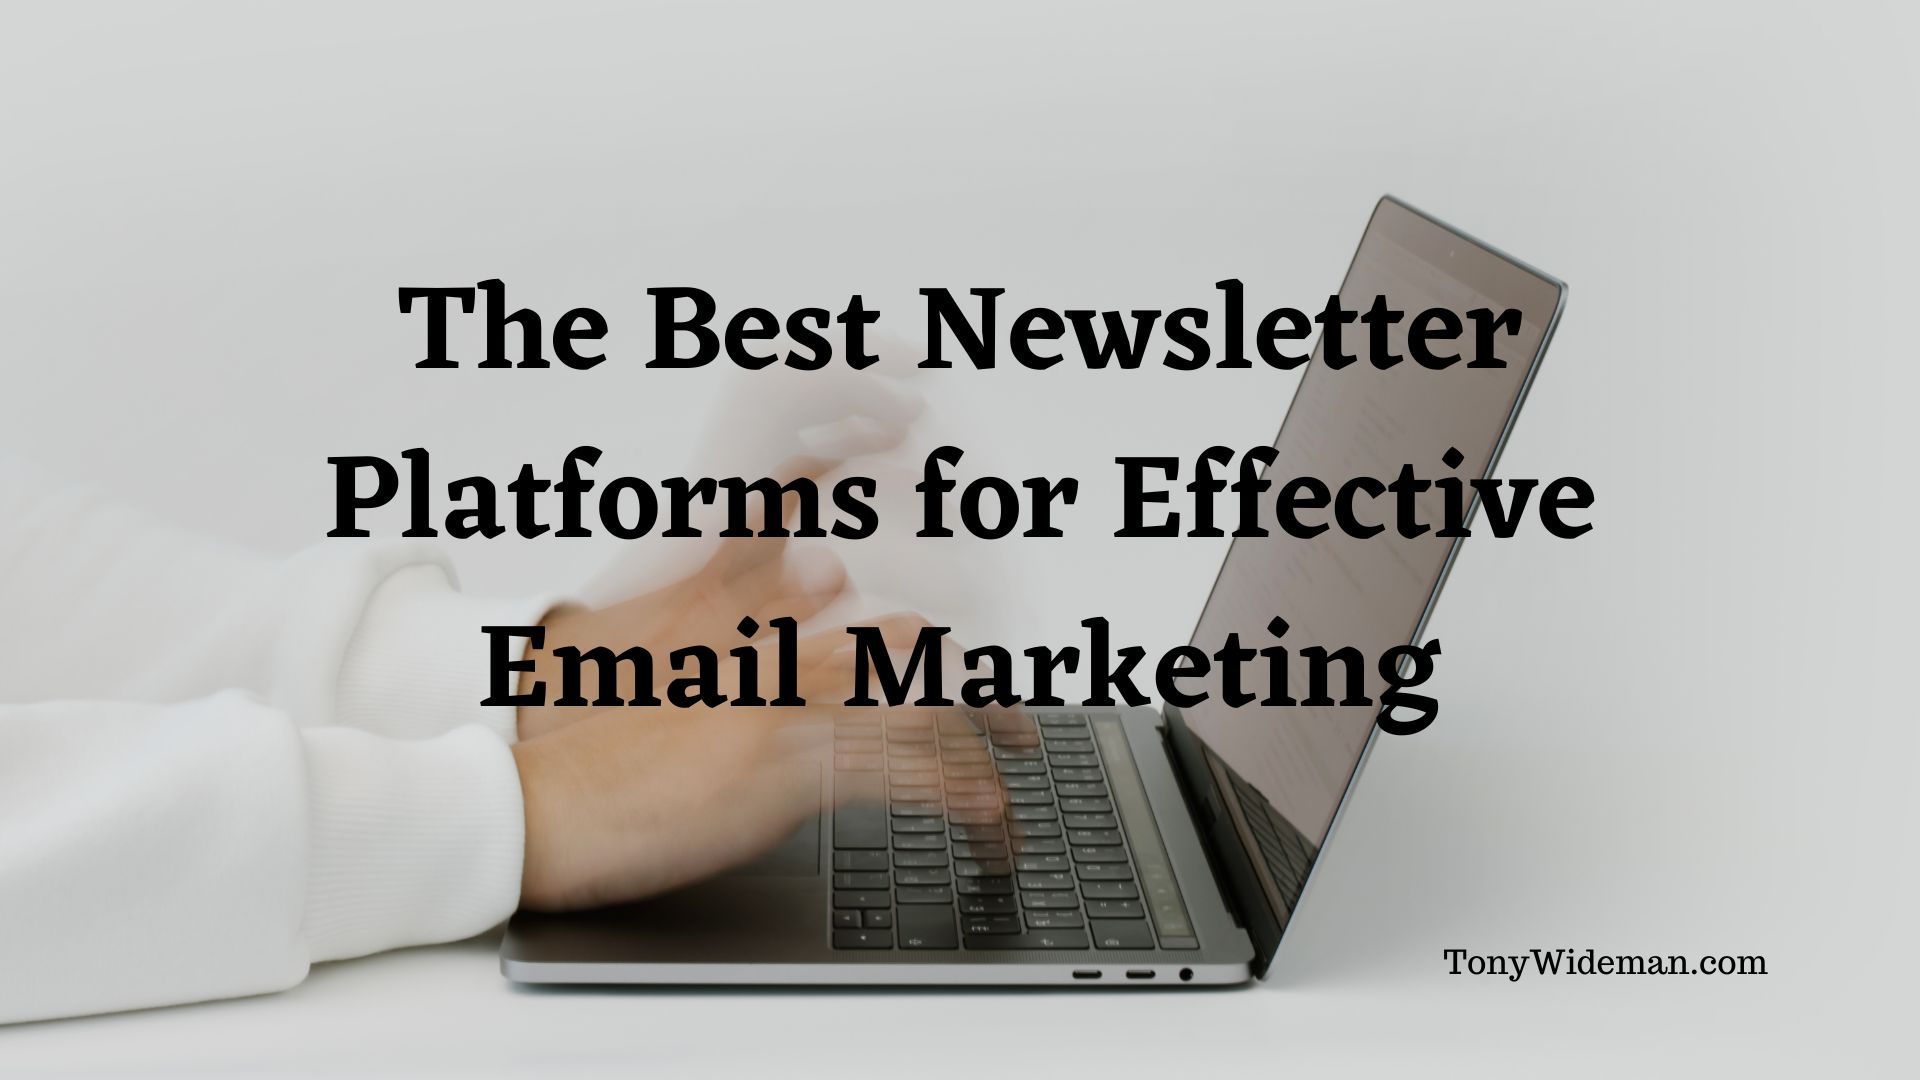 The Best Newsletter Platforms for Effective Email Marketing